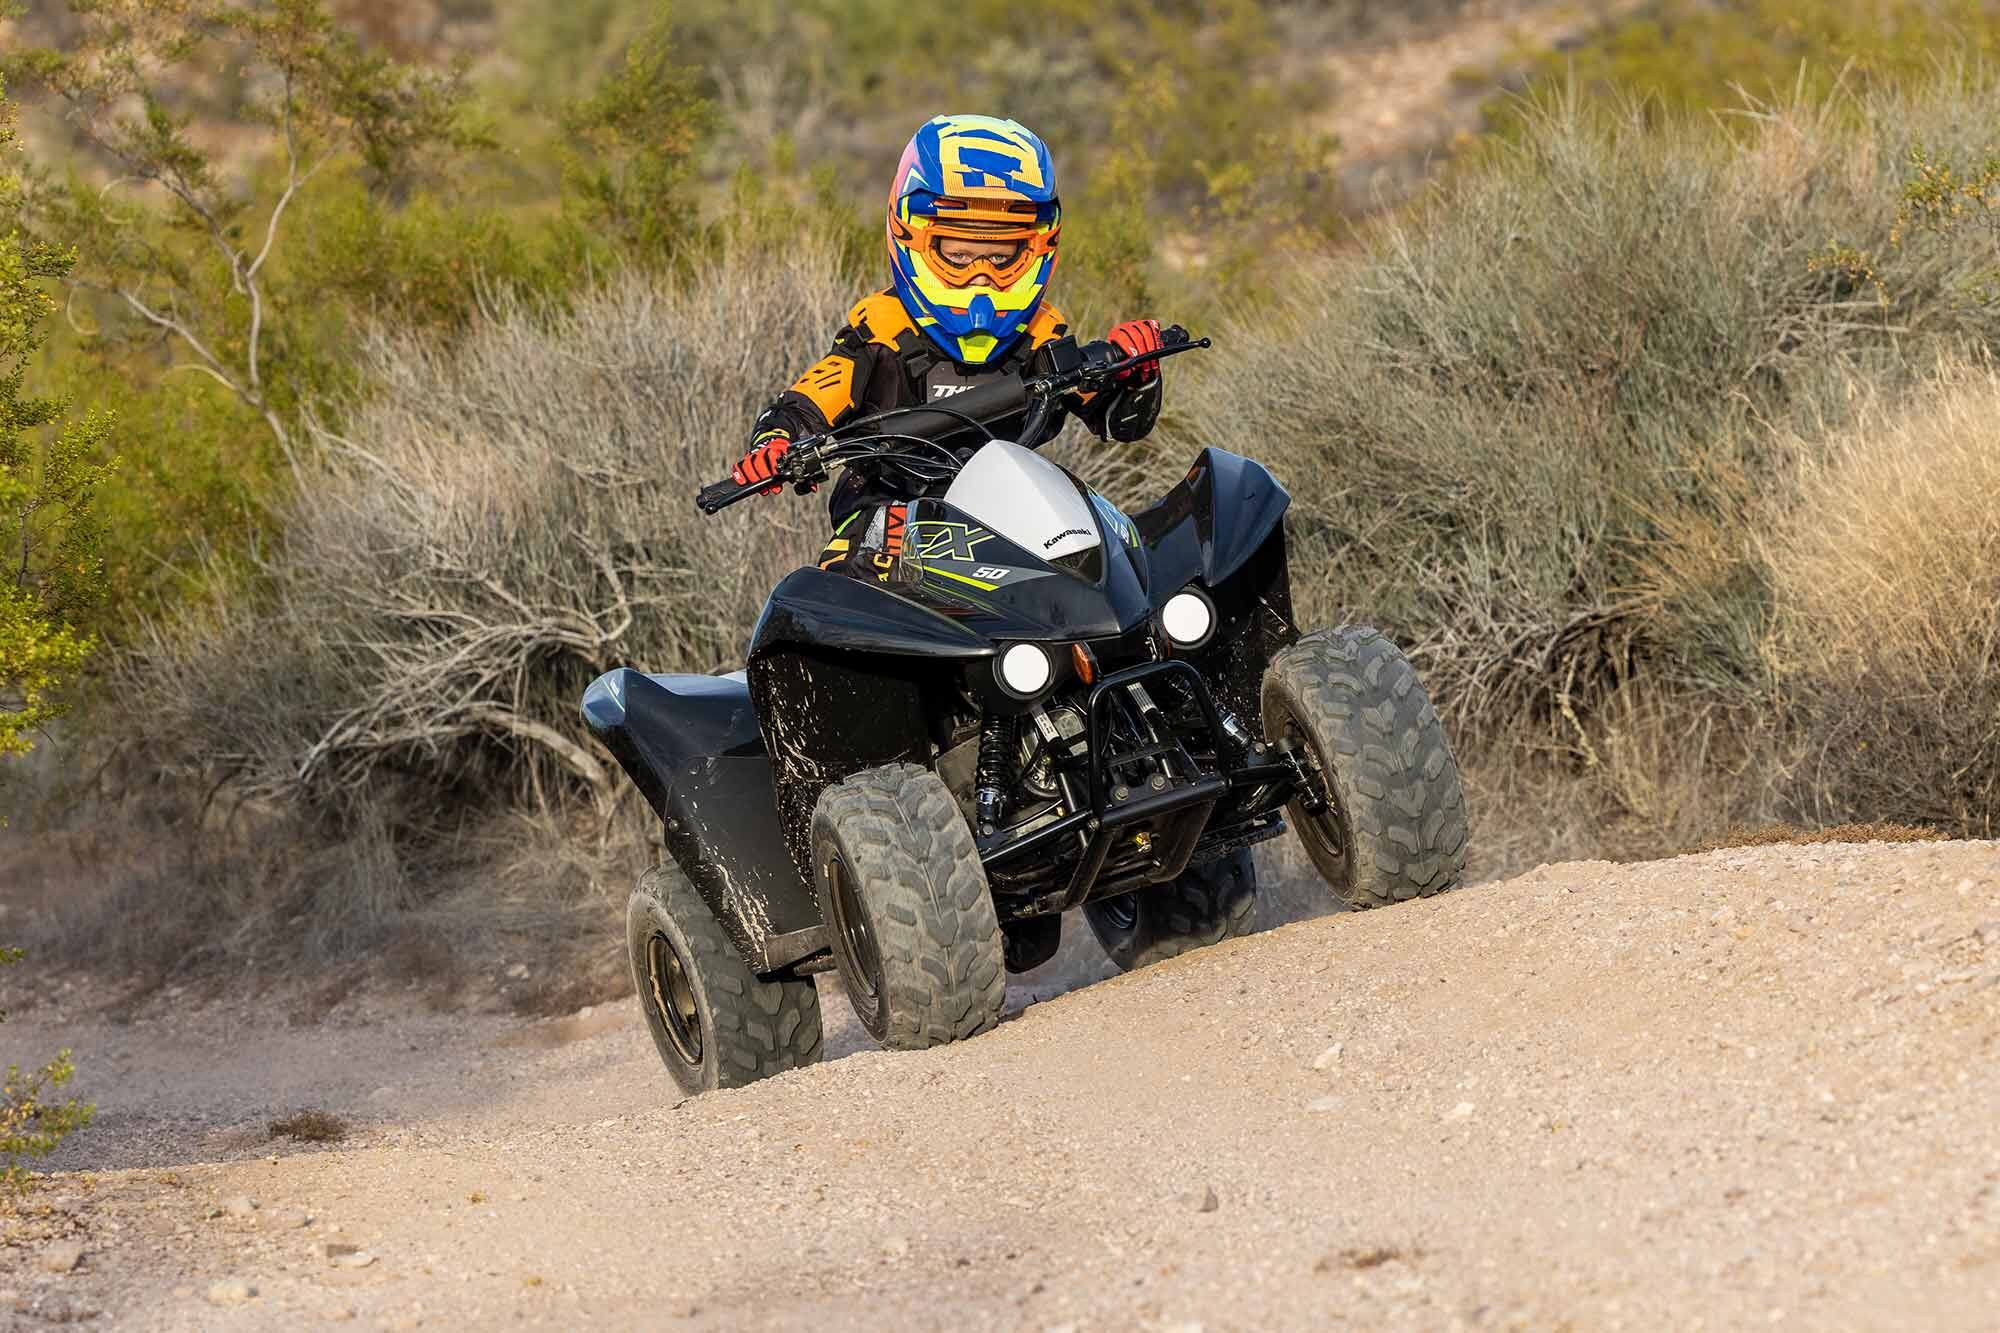 The Kawasaki KFX50 has a wide stance for better overall stability and confident cornering.